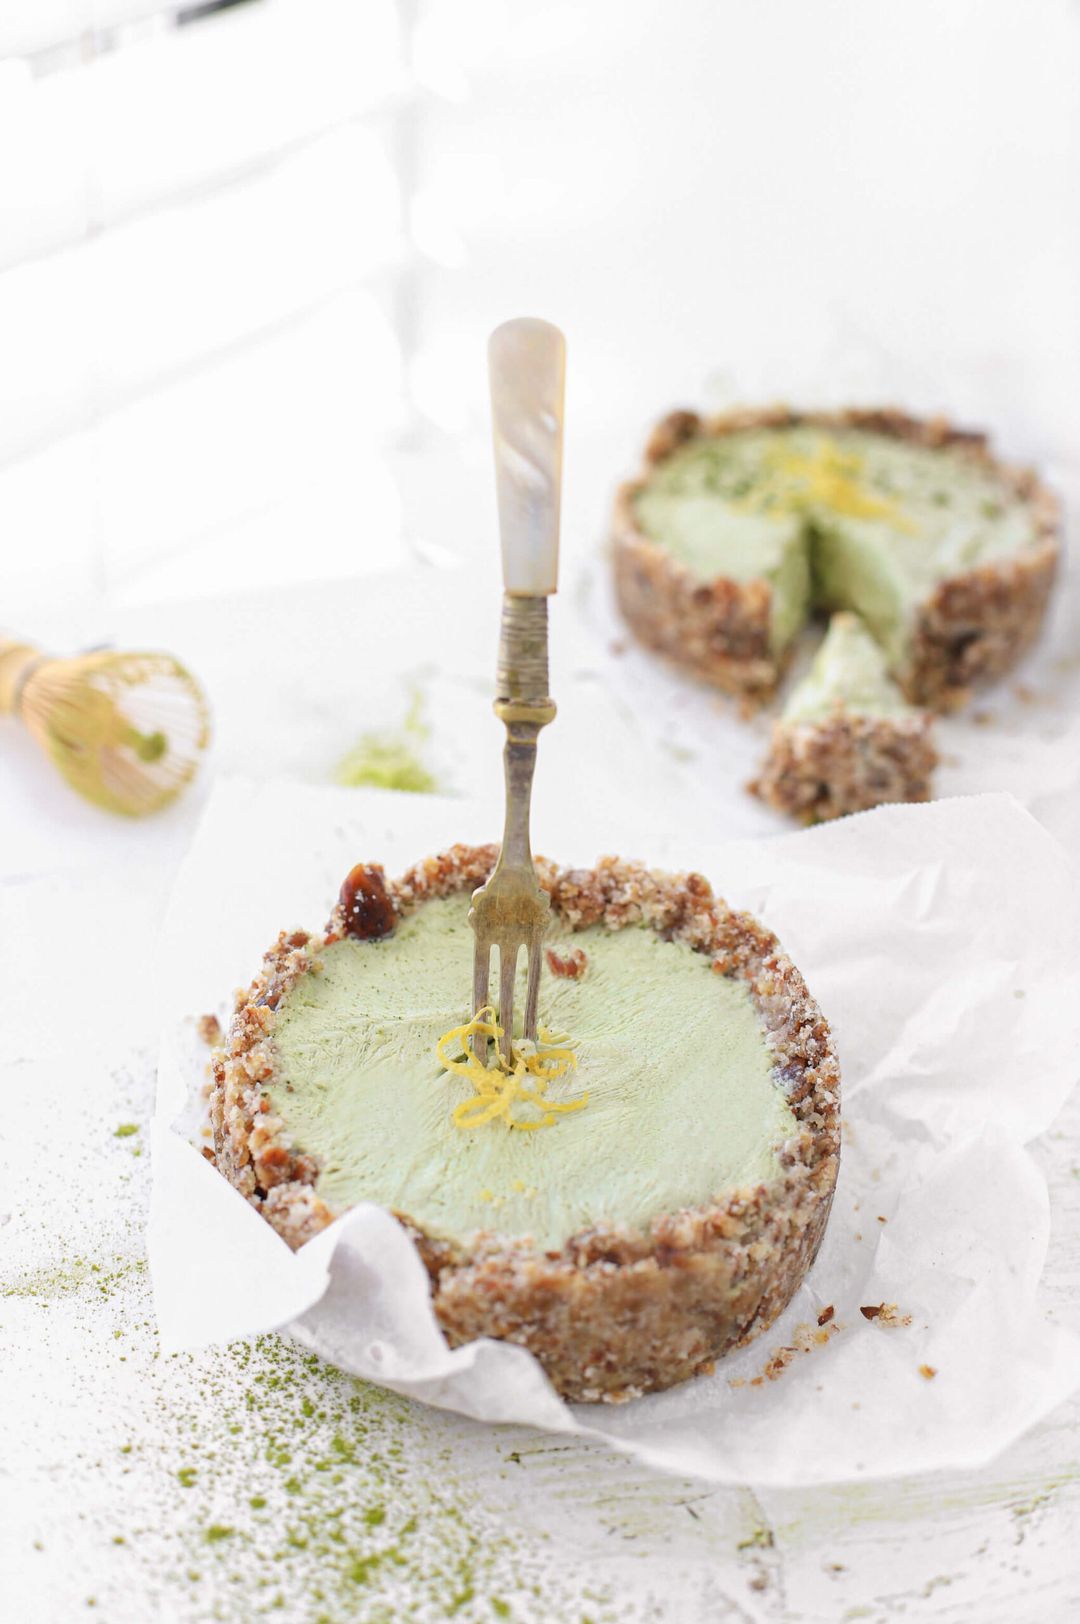 Matcha date cake with coconut and lemon